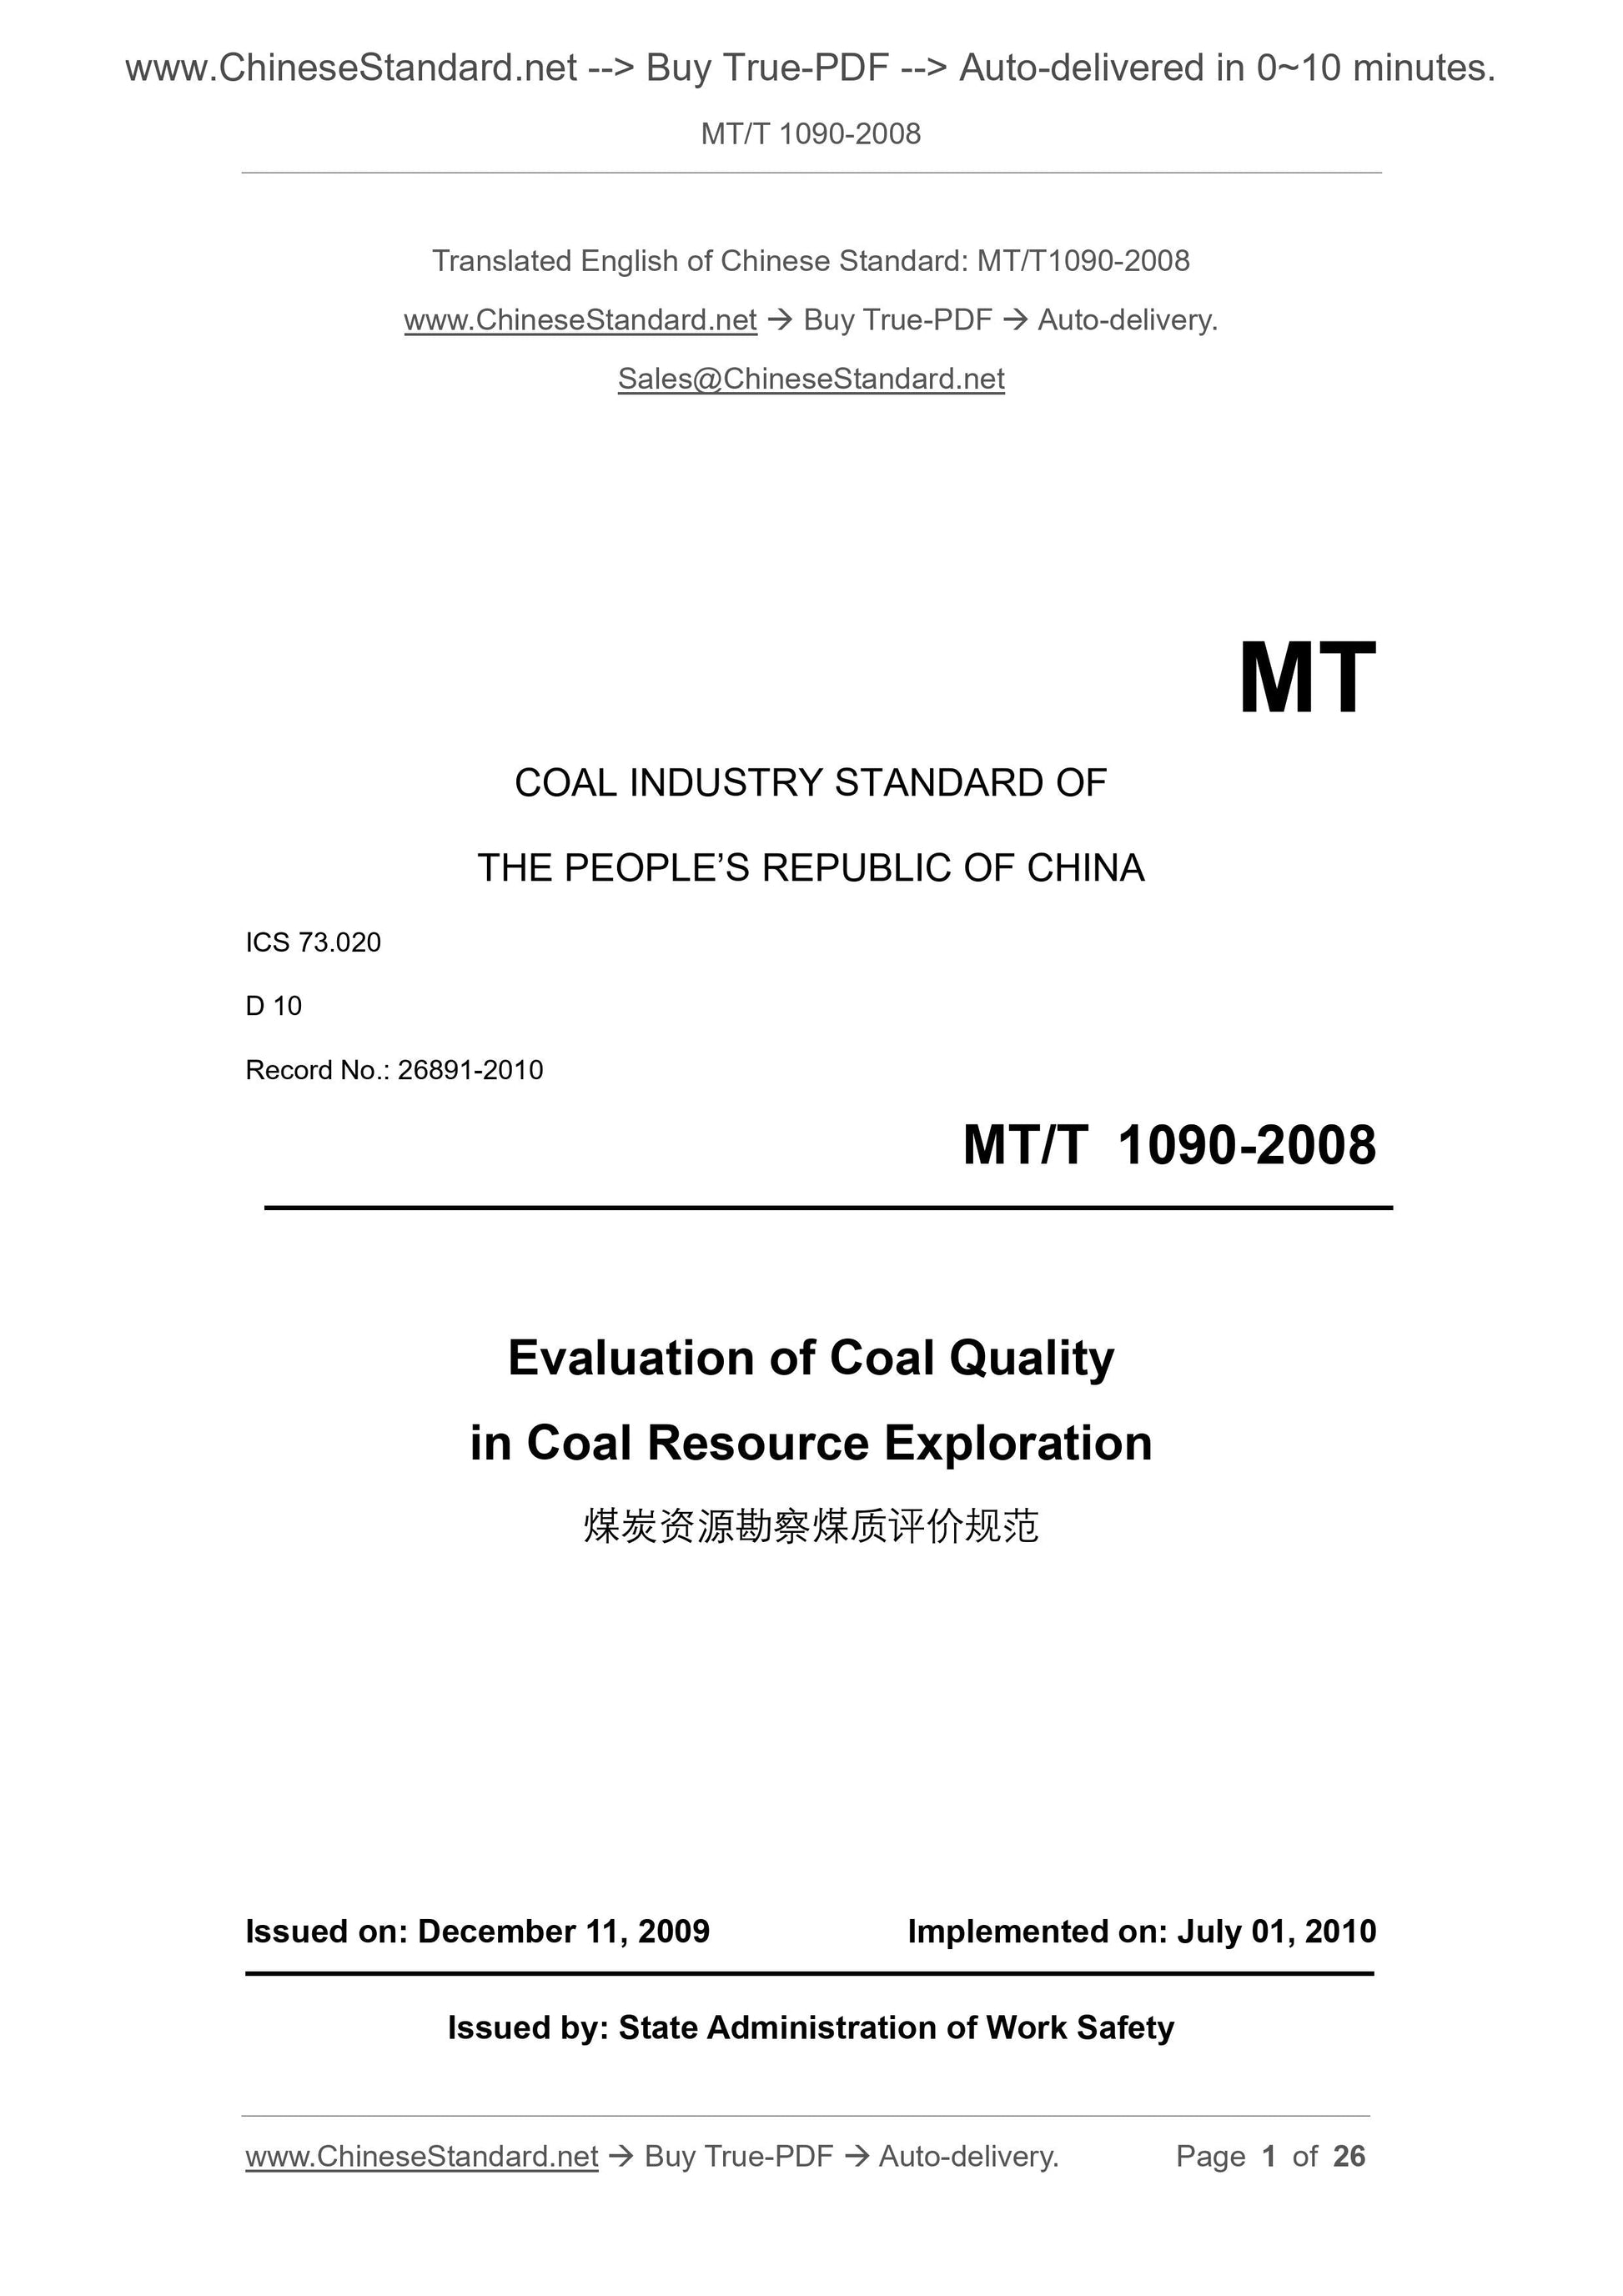 MT/T 1090-2008 Page 1